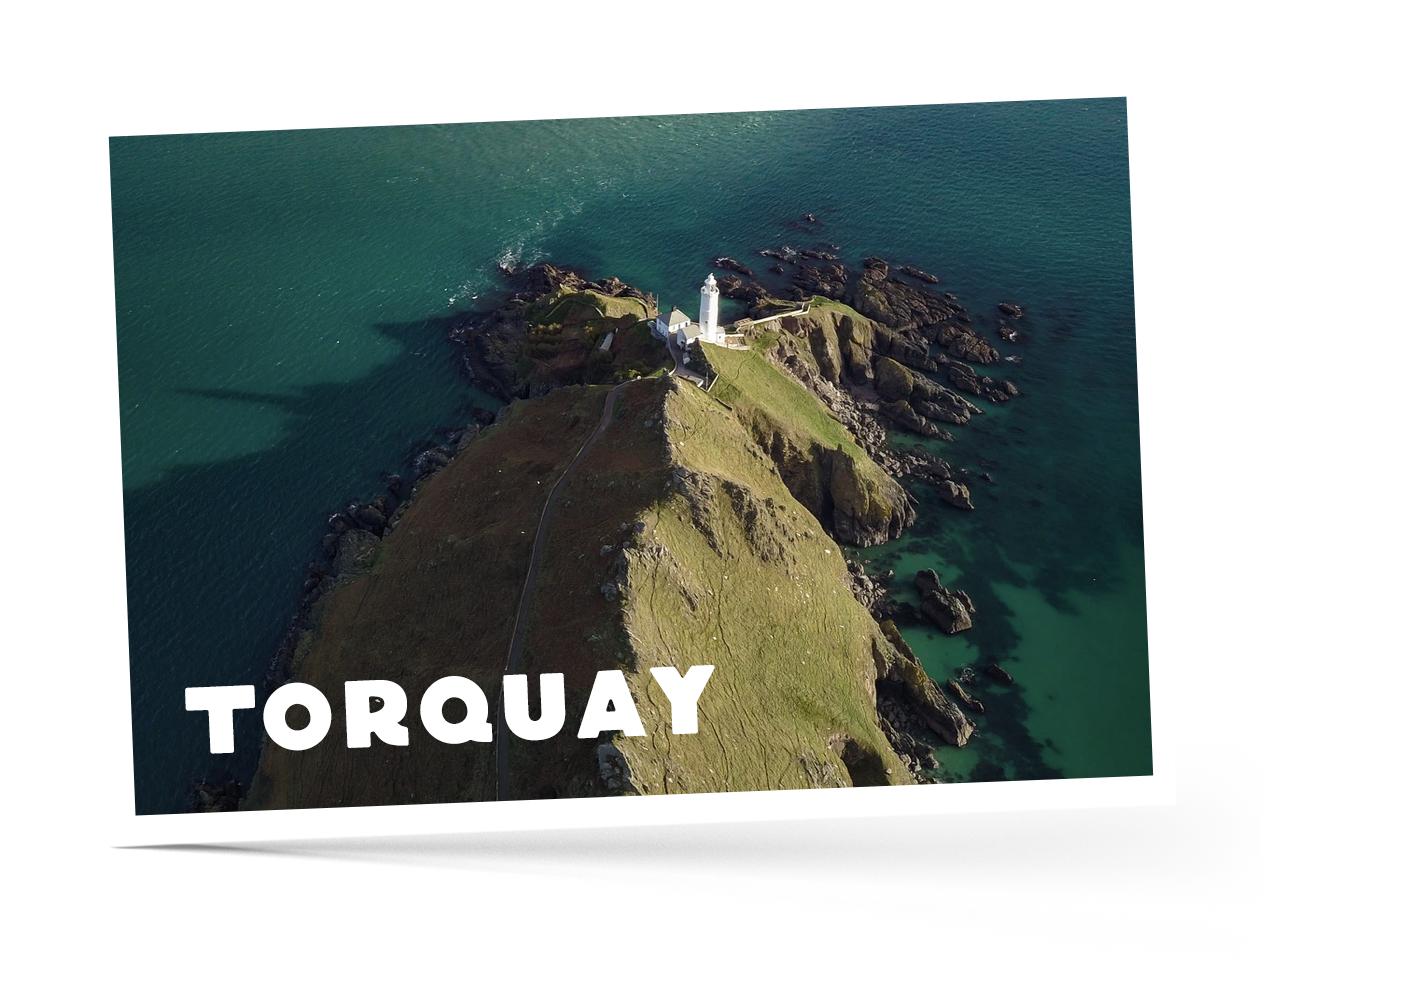 Birdseye view of rocky cliff in Torquay, Devon surrounded by loose rocks and sea with a lighthouse in at the bottom